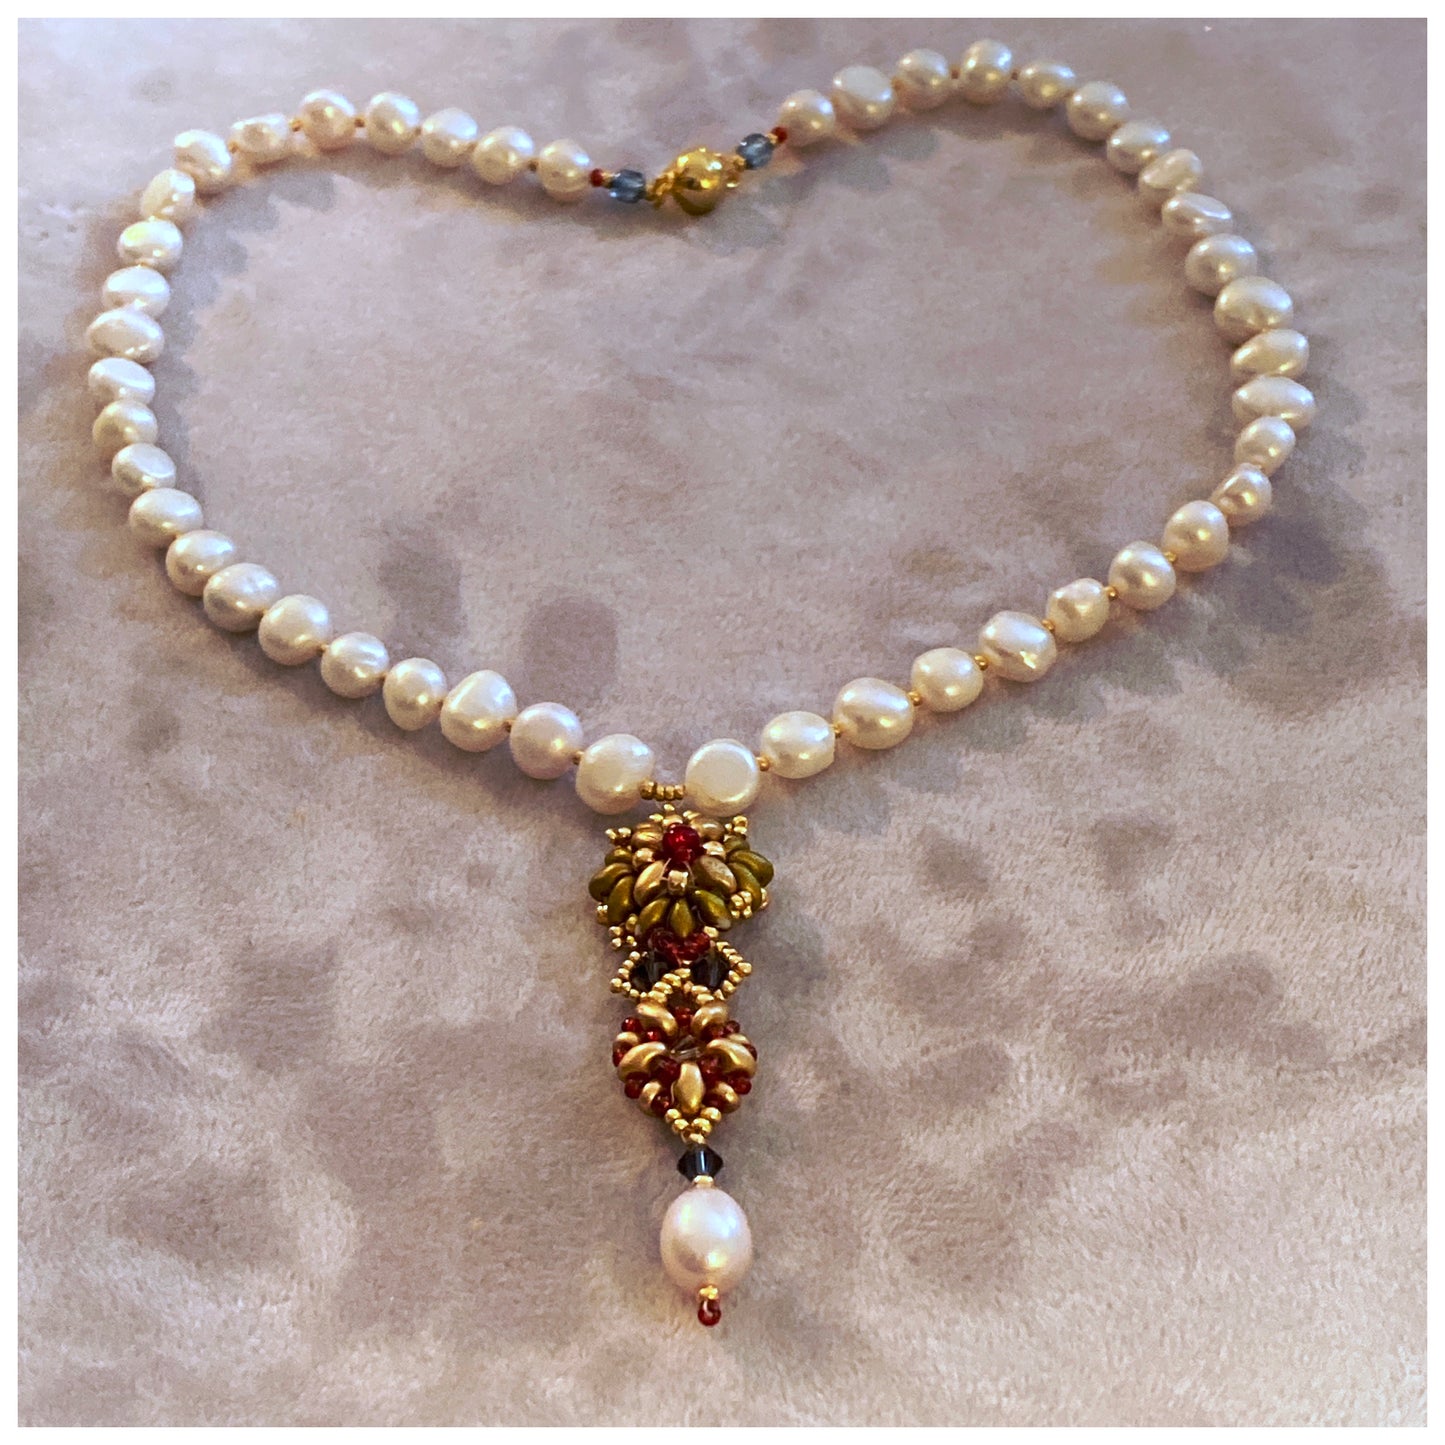 Elizabethan style necklace with  cultured pearls